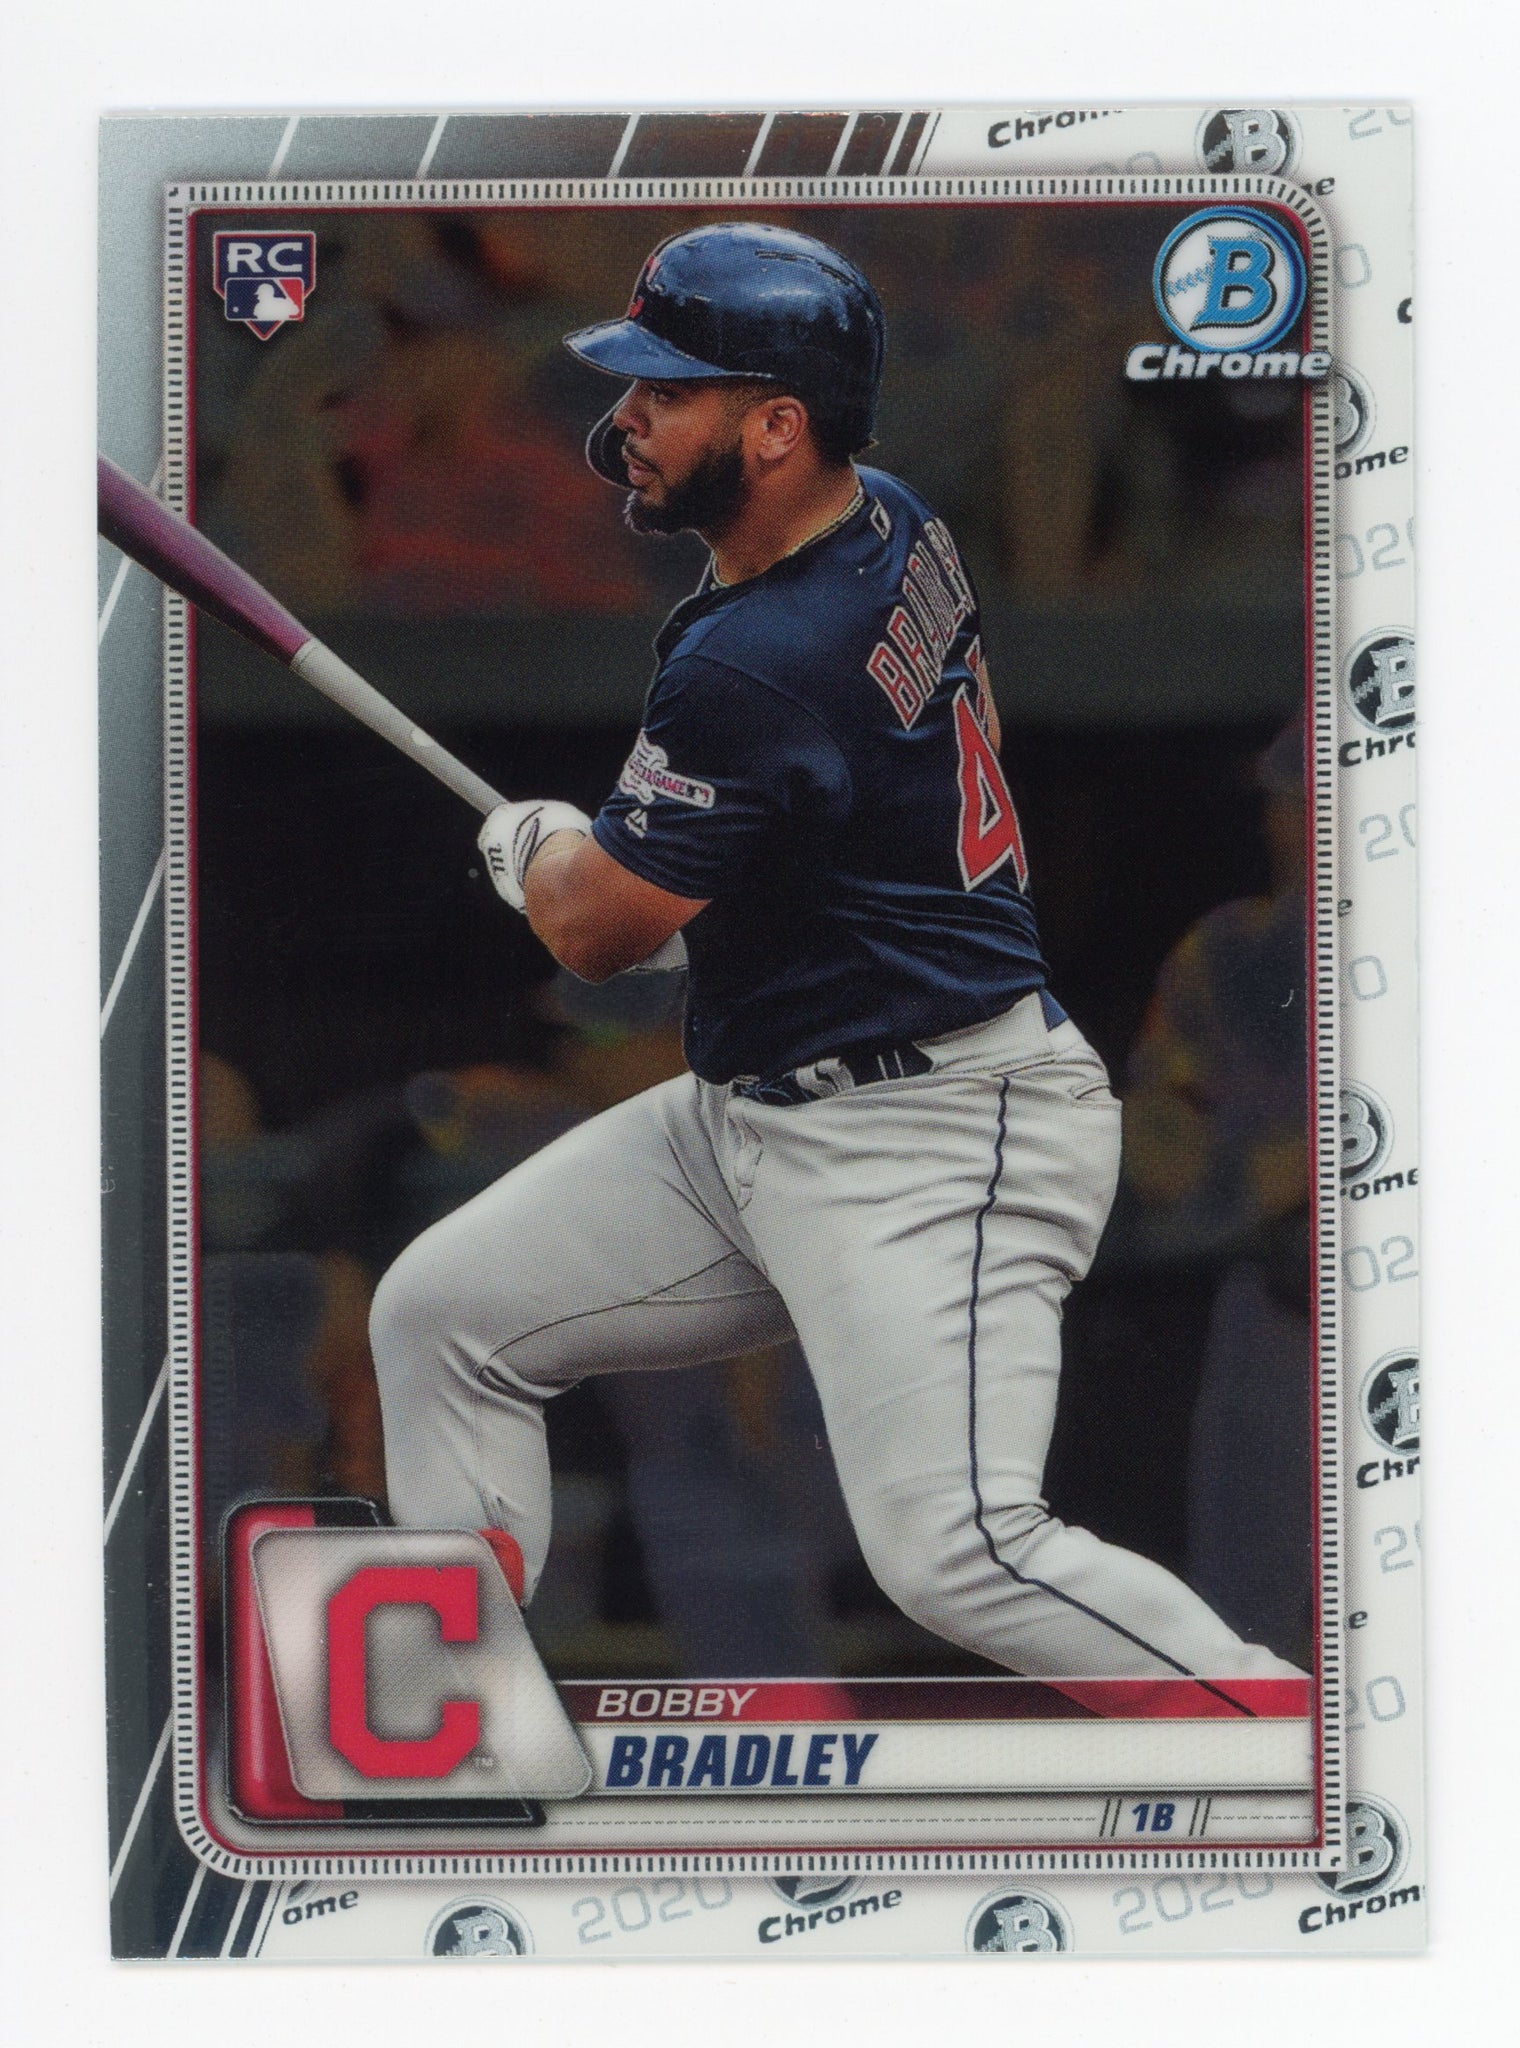 2020 Bobby Bradley Rookie Topps Chrome Cleveland Indians #47